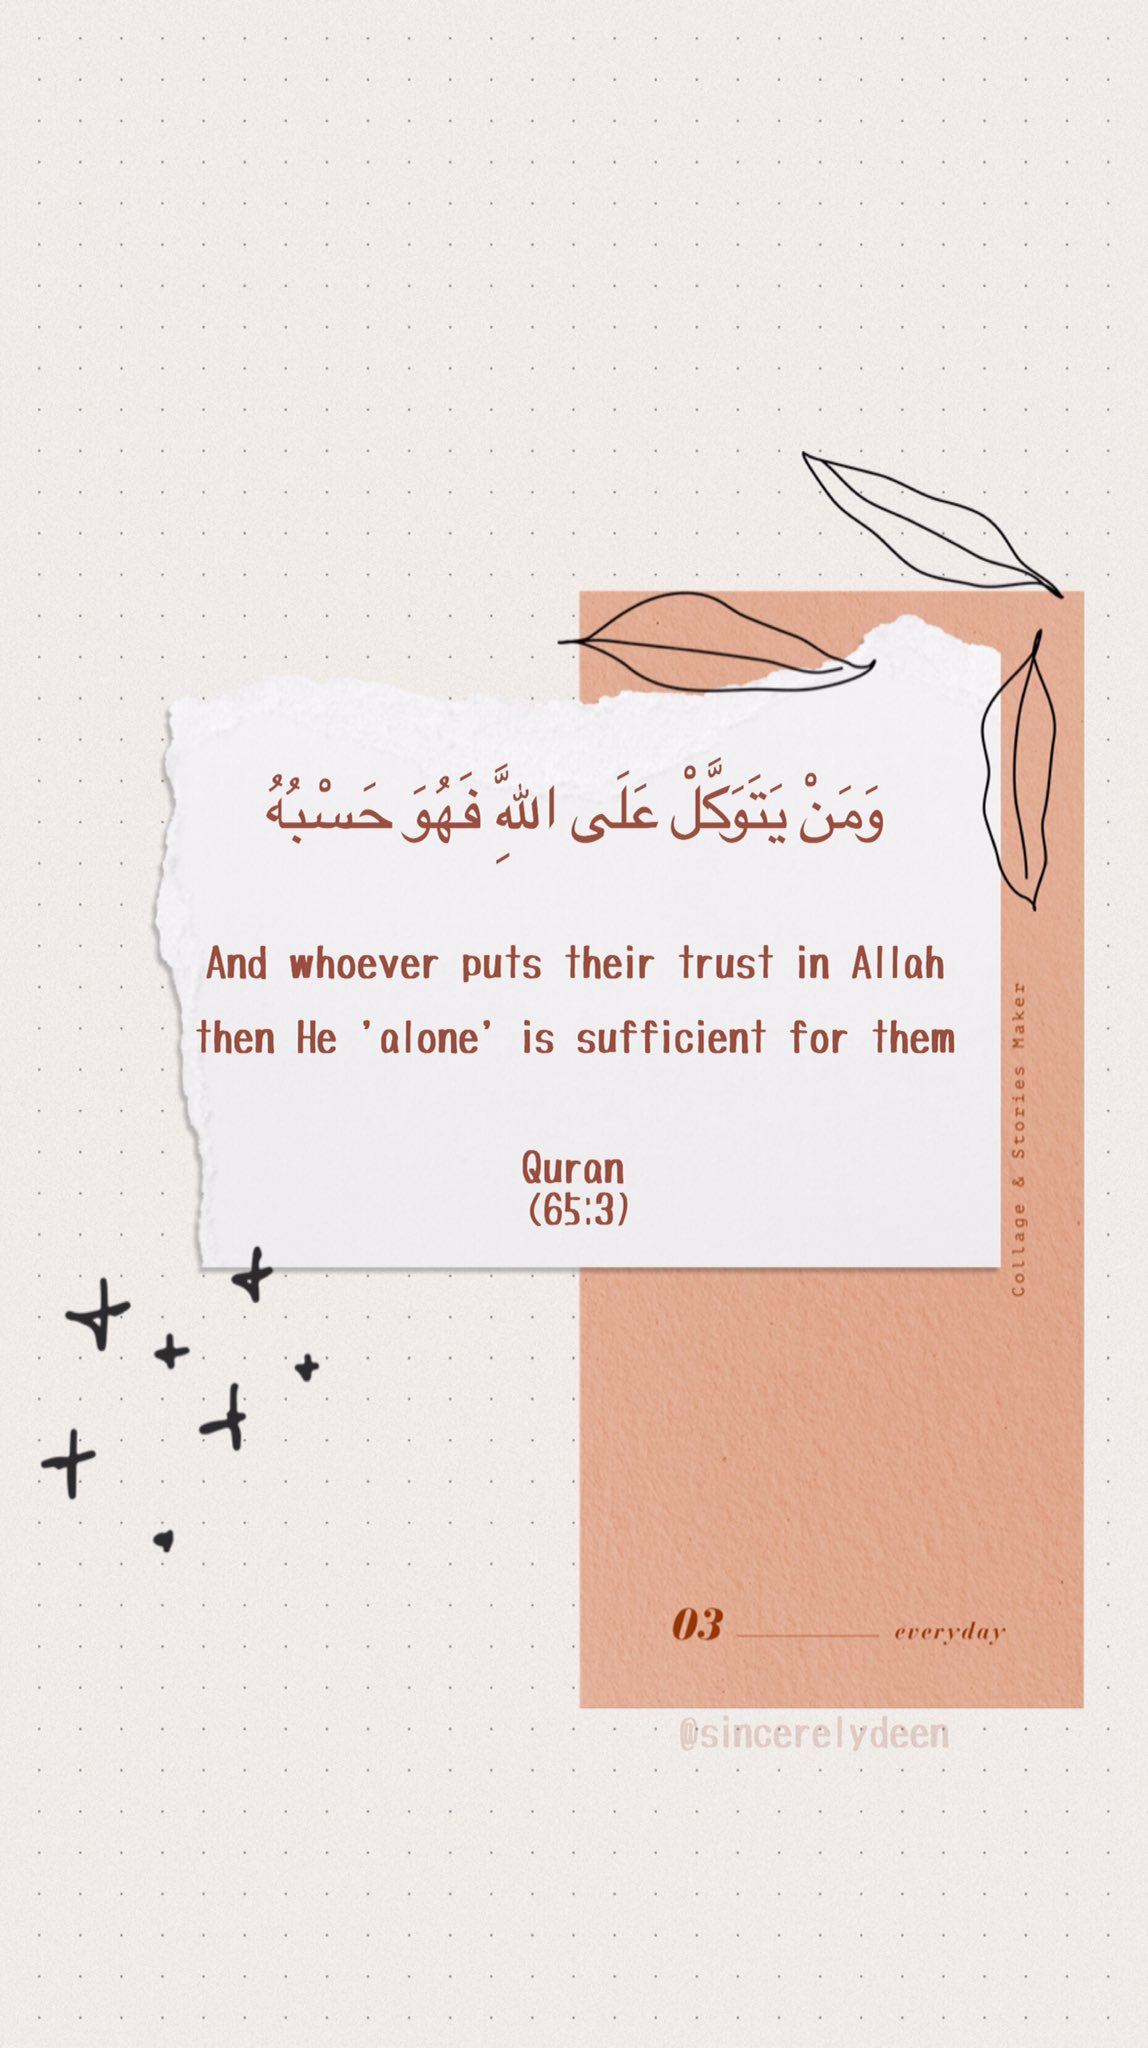 on Twitter: i made these islamic reminder wallpaper. hope they may be beneficial to us all